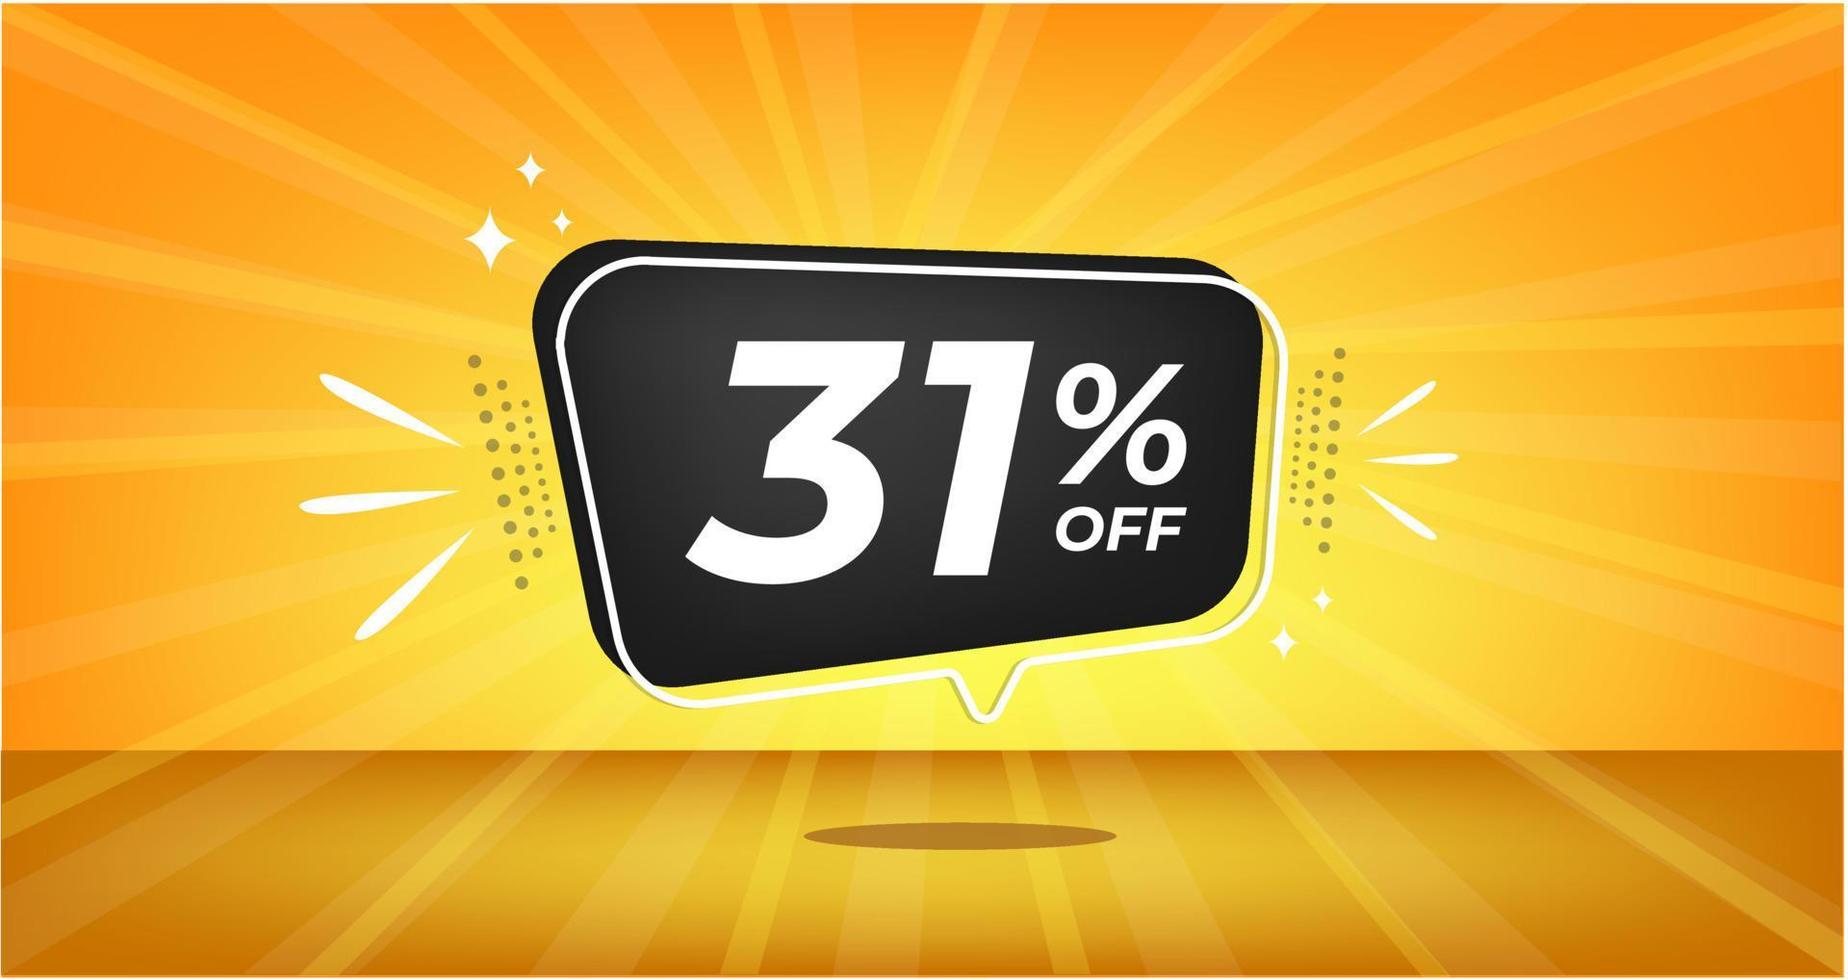 31 percent off. Yellow banner with thirty-one percent discount on a black balloon for mega big sales. vector